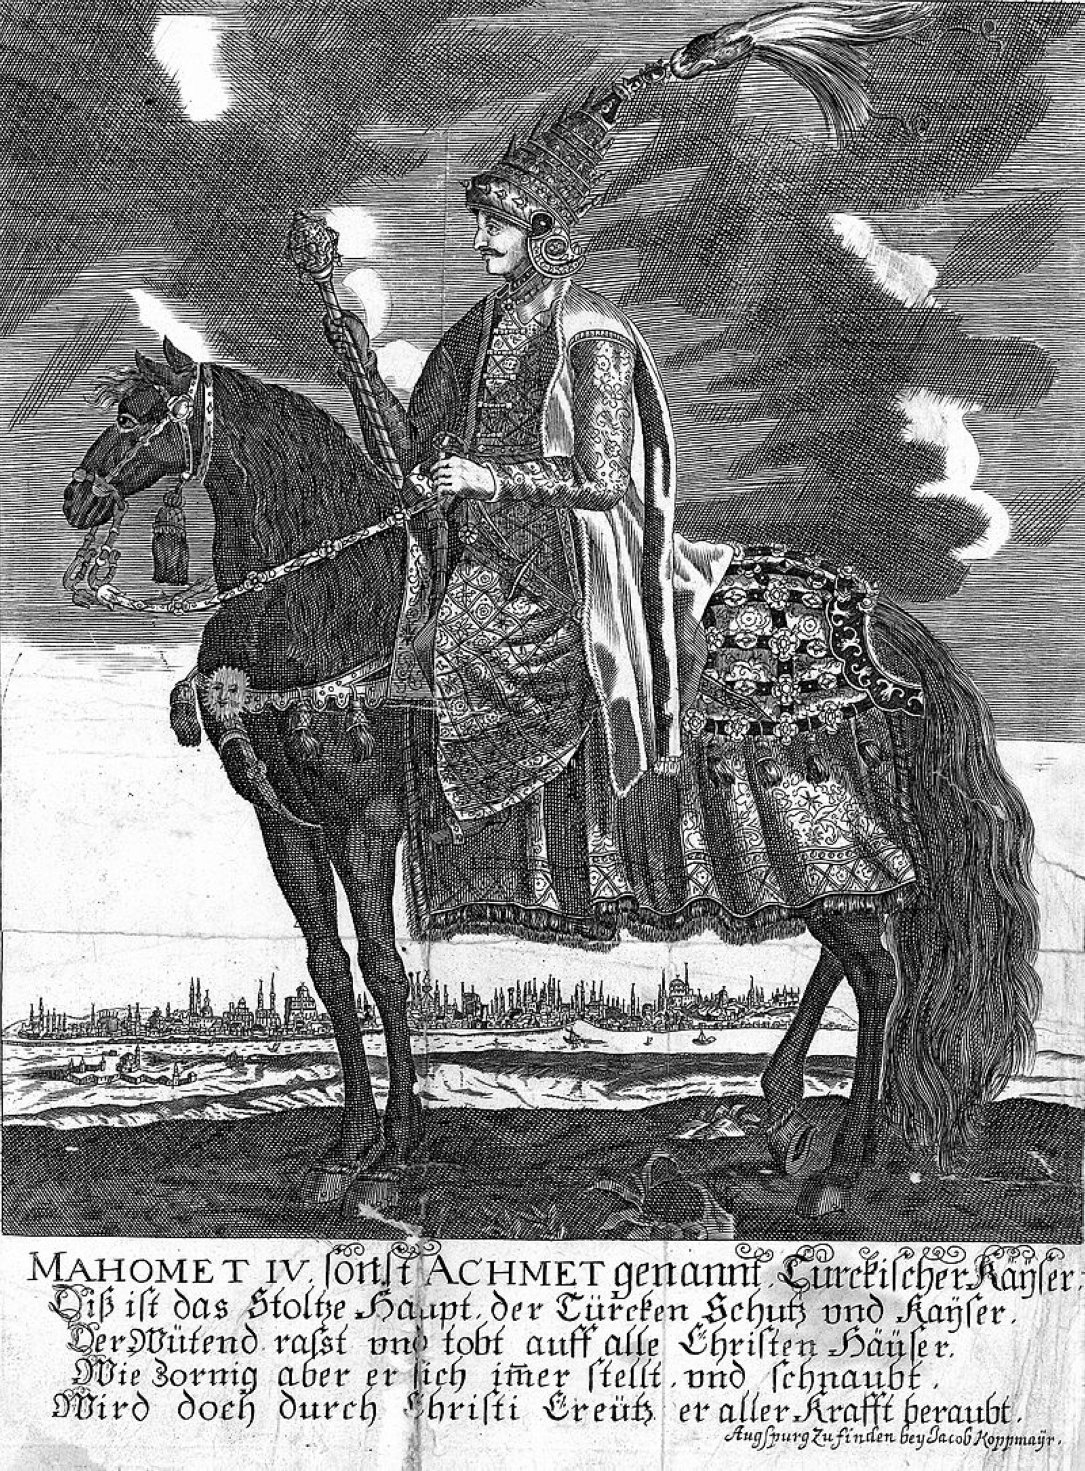 A depiction of Sultan Mehmed IV mounted on a horse.